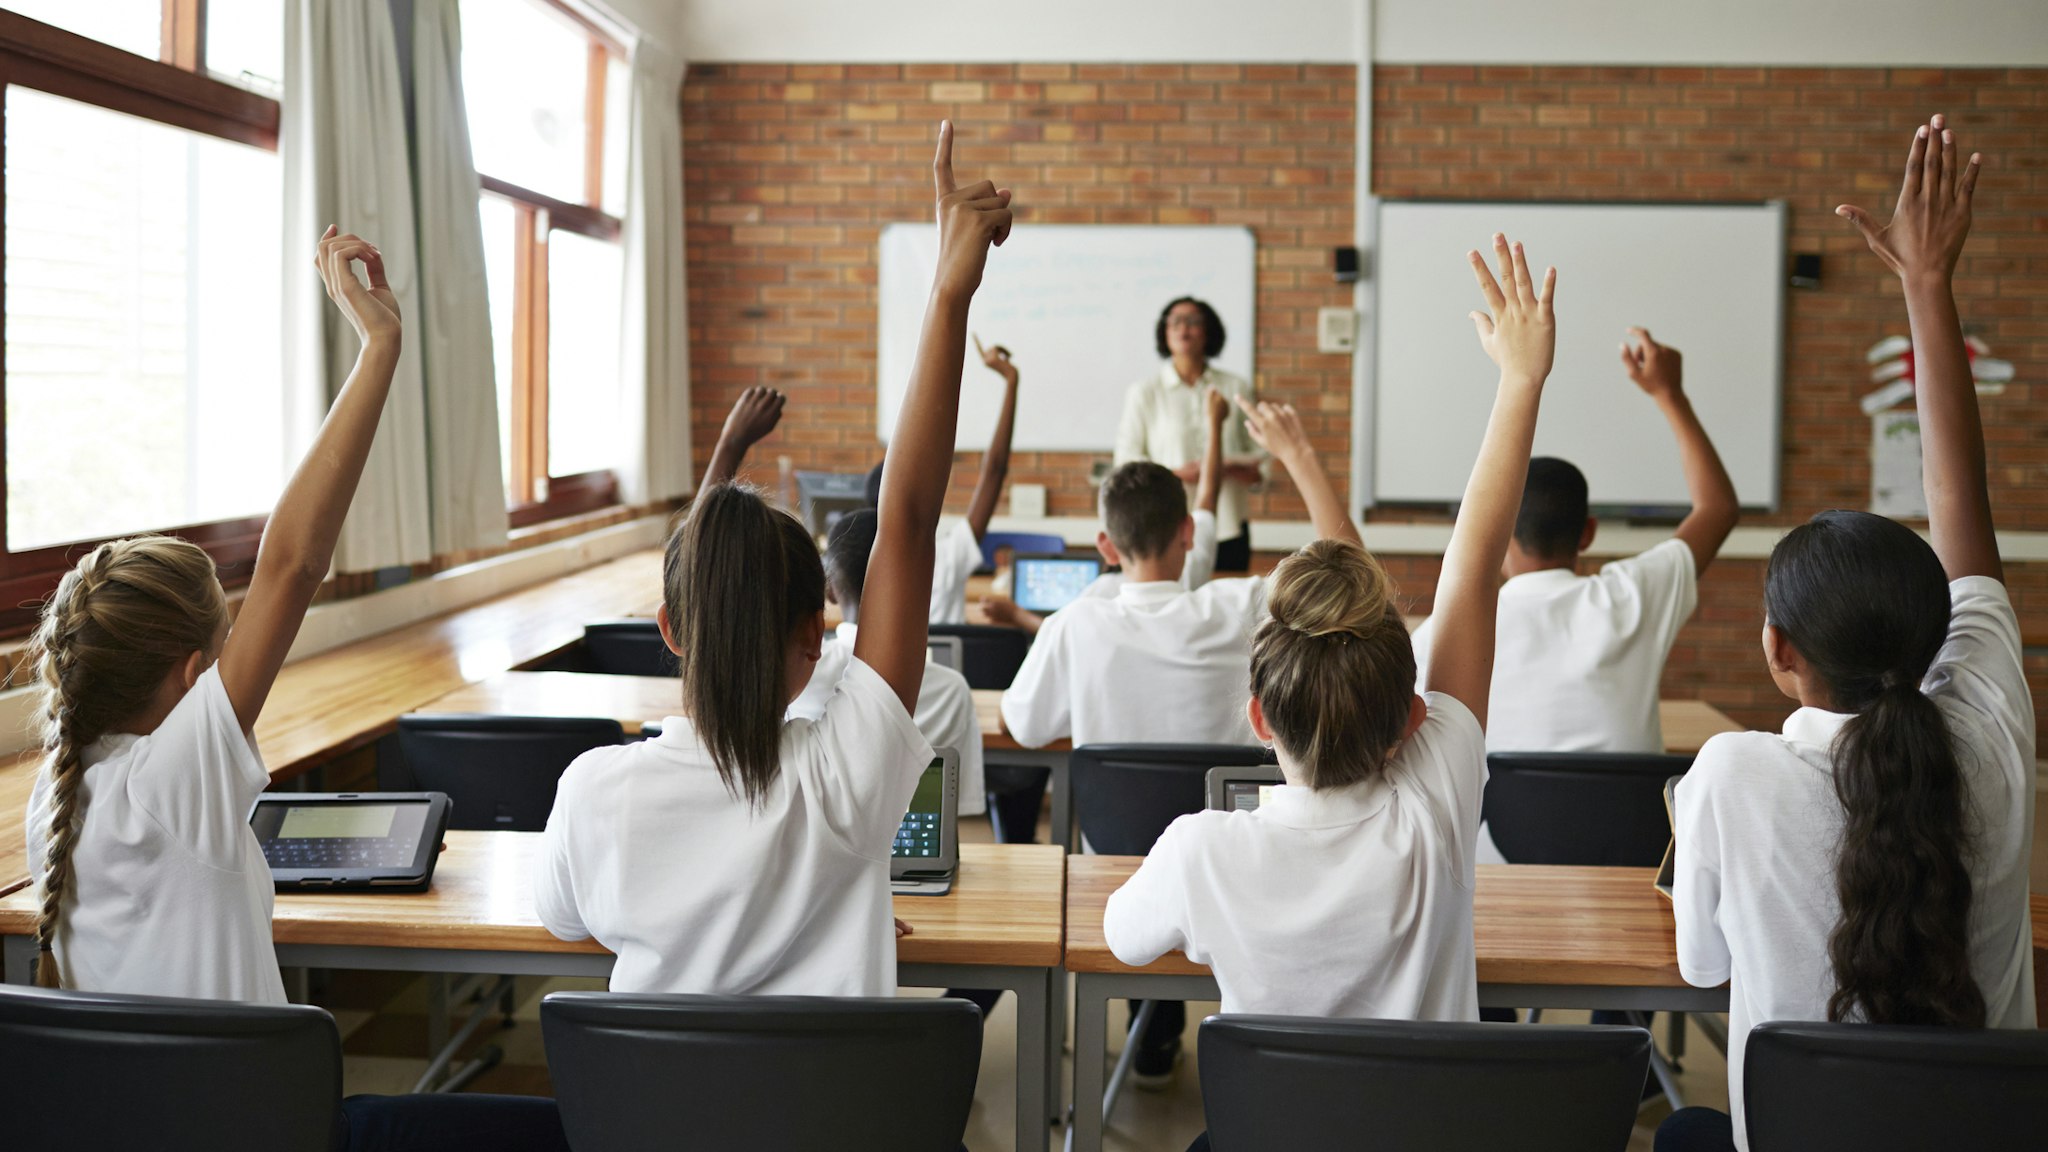 Back view of schoolclass with raised hands - stock photo